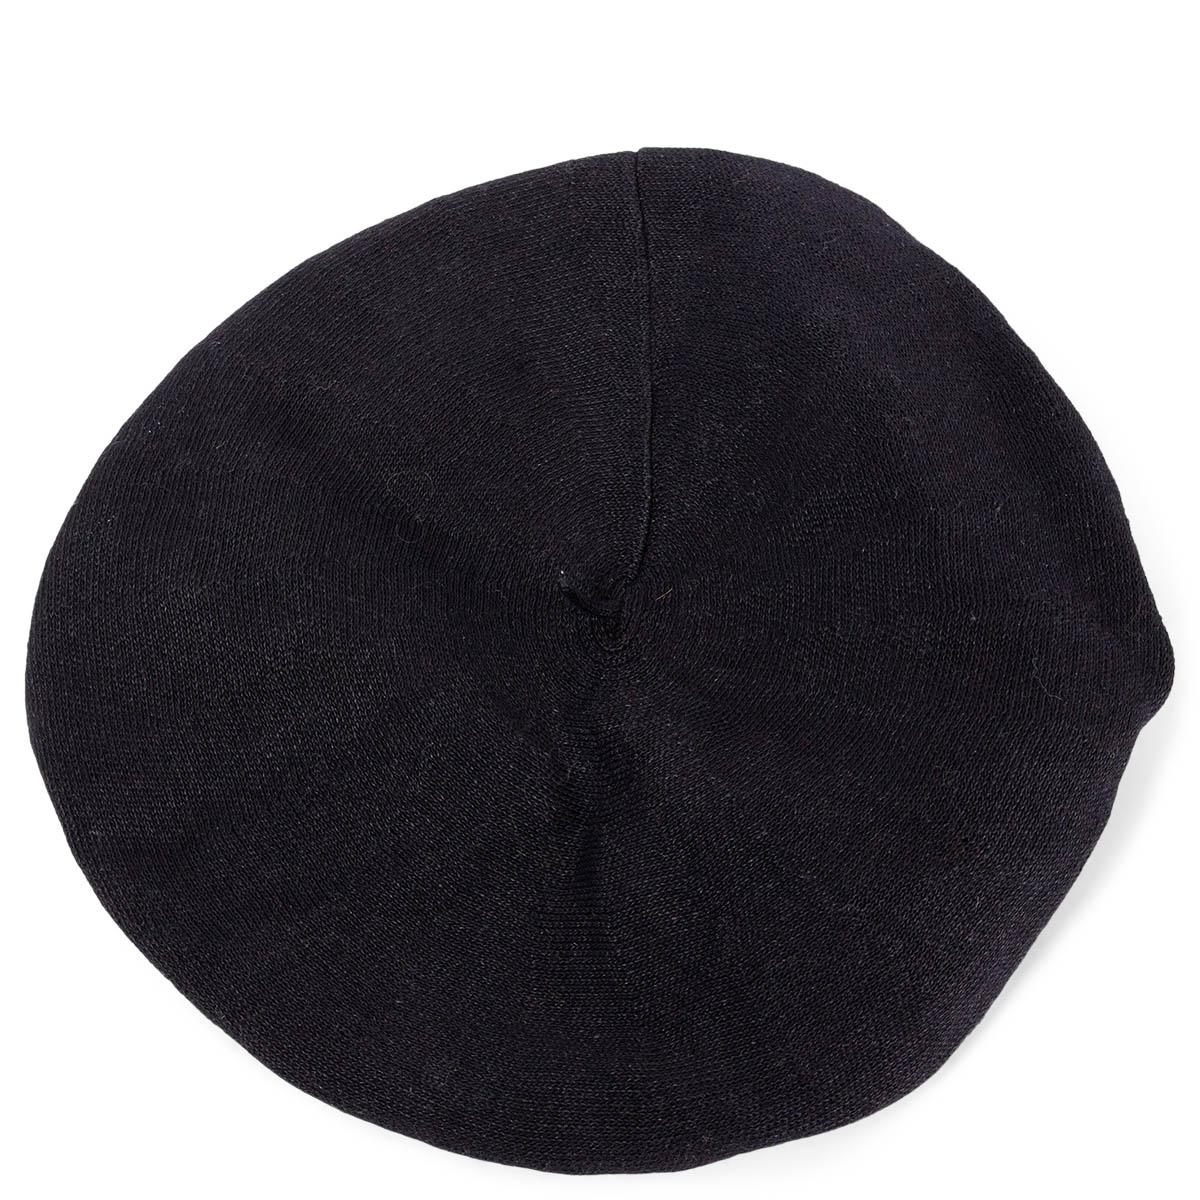 100% authentic Christian Dior beret hat in black linen (90%) and nylon (10%). The design has a elastic band and is embellished with the DIOR logo in antique gold-tone metal. Has been worn and is in excellent condition.

2019